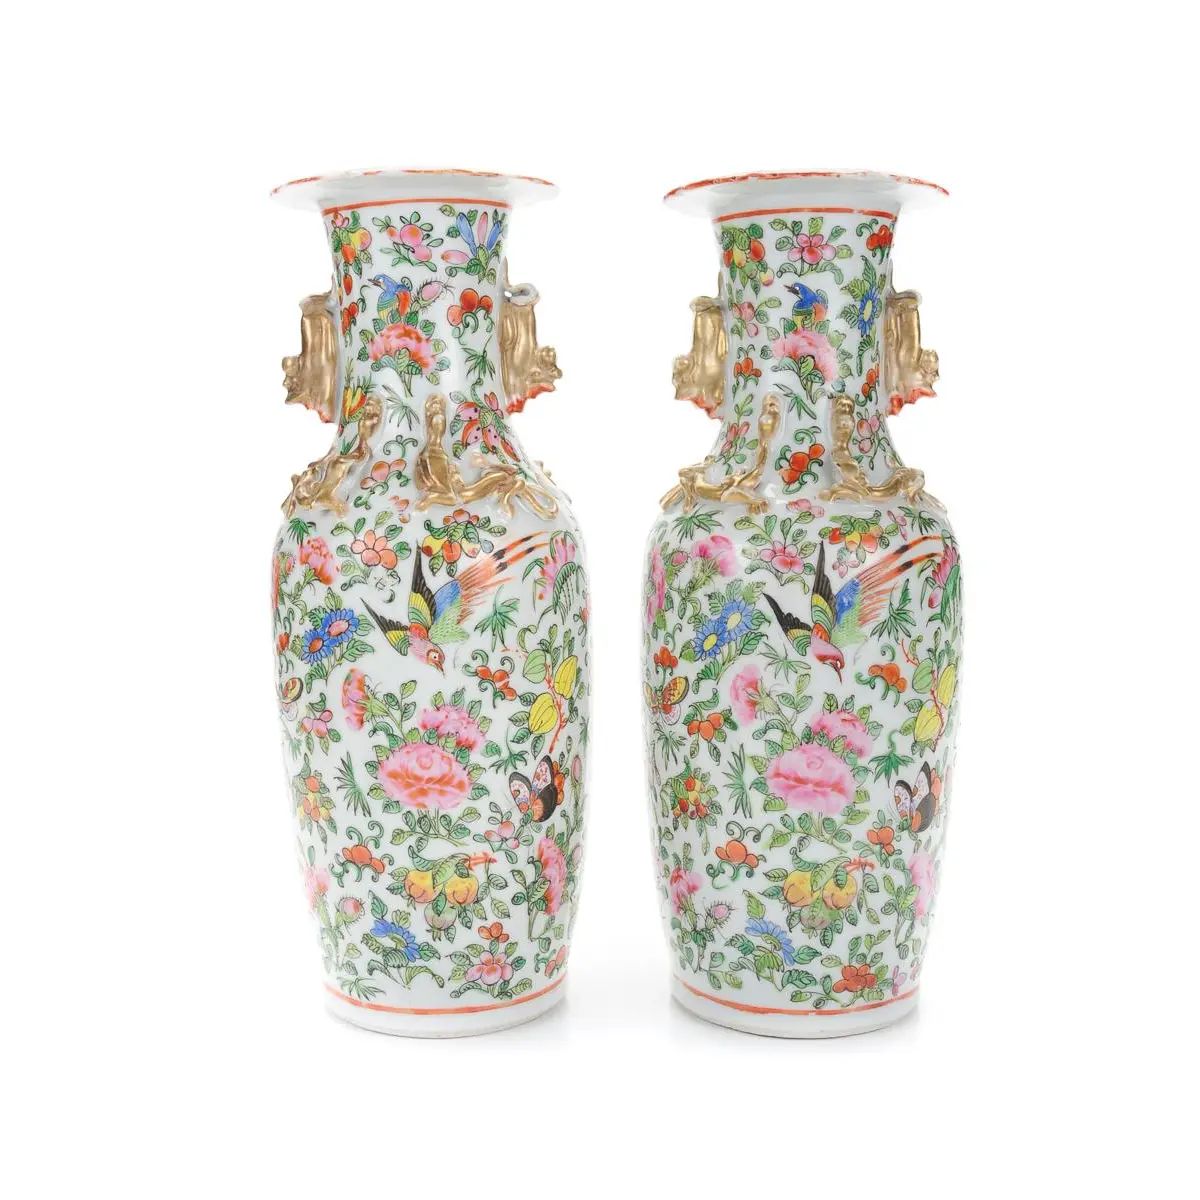 Antique Chinese 12" Porcelain Vases - A Pair | Chairish